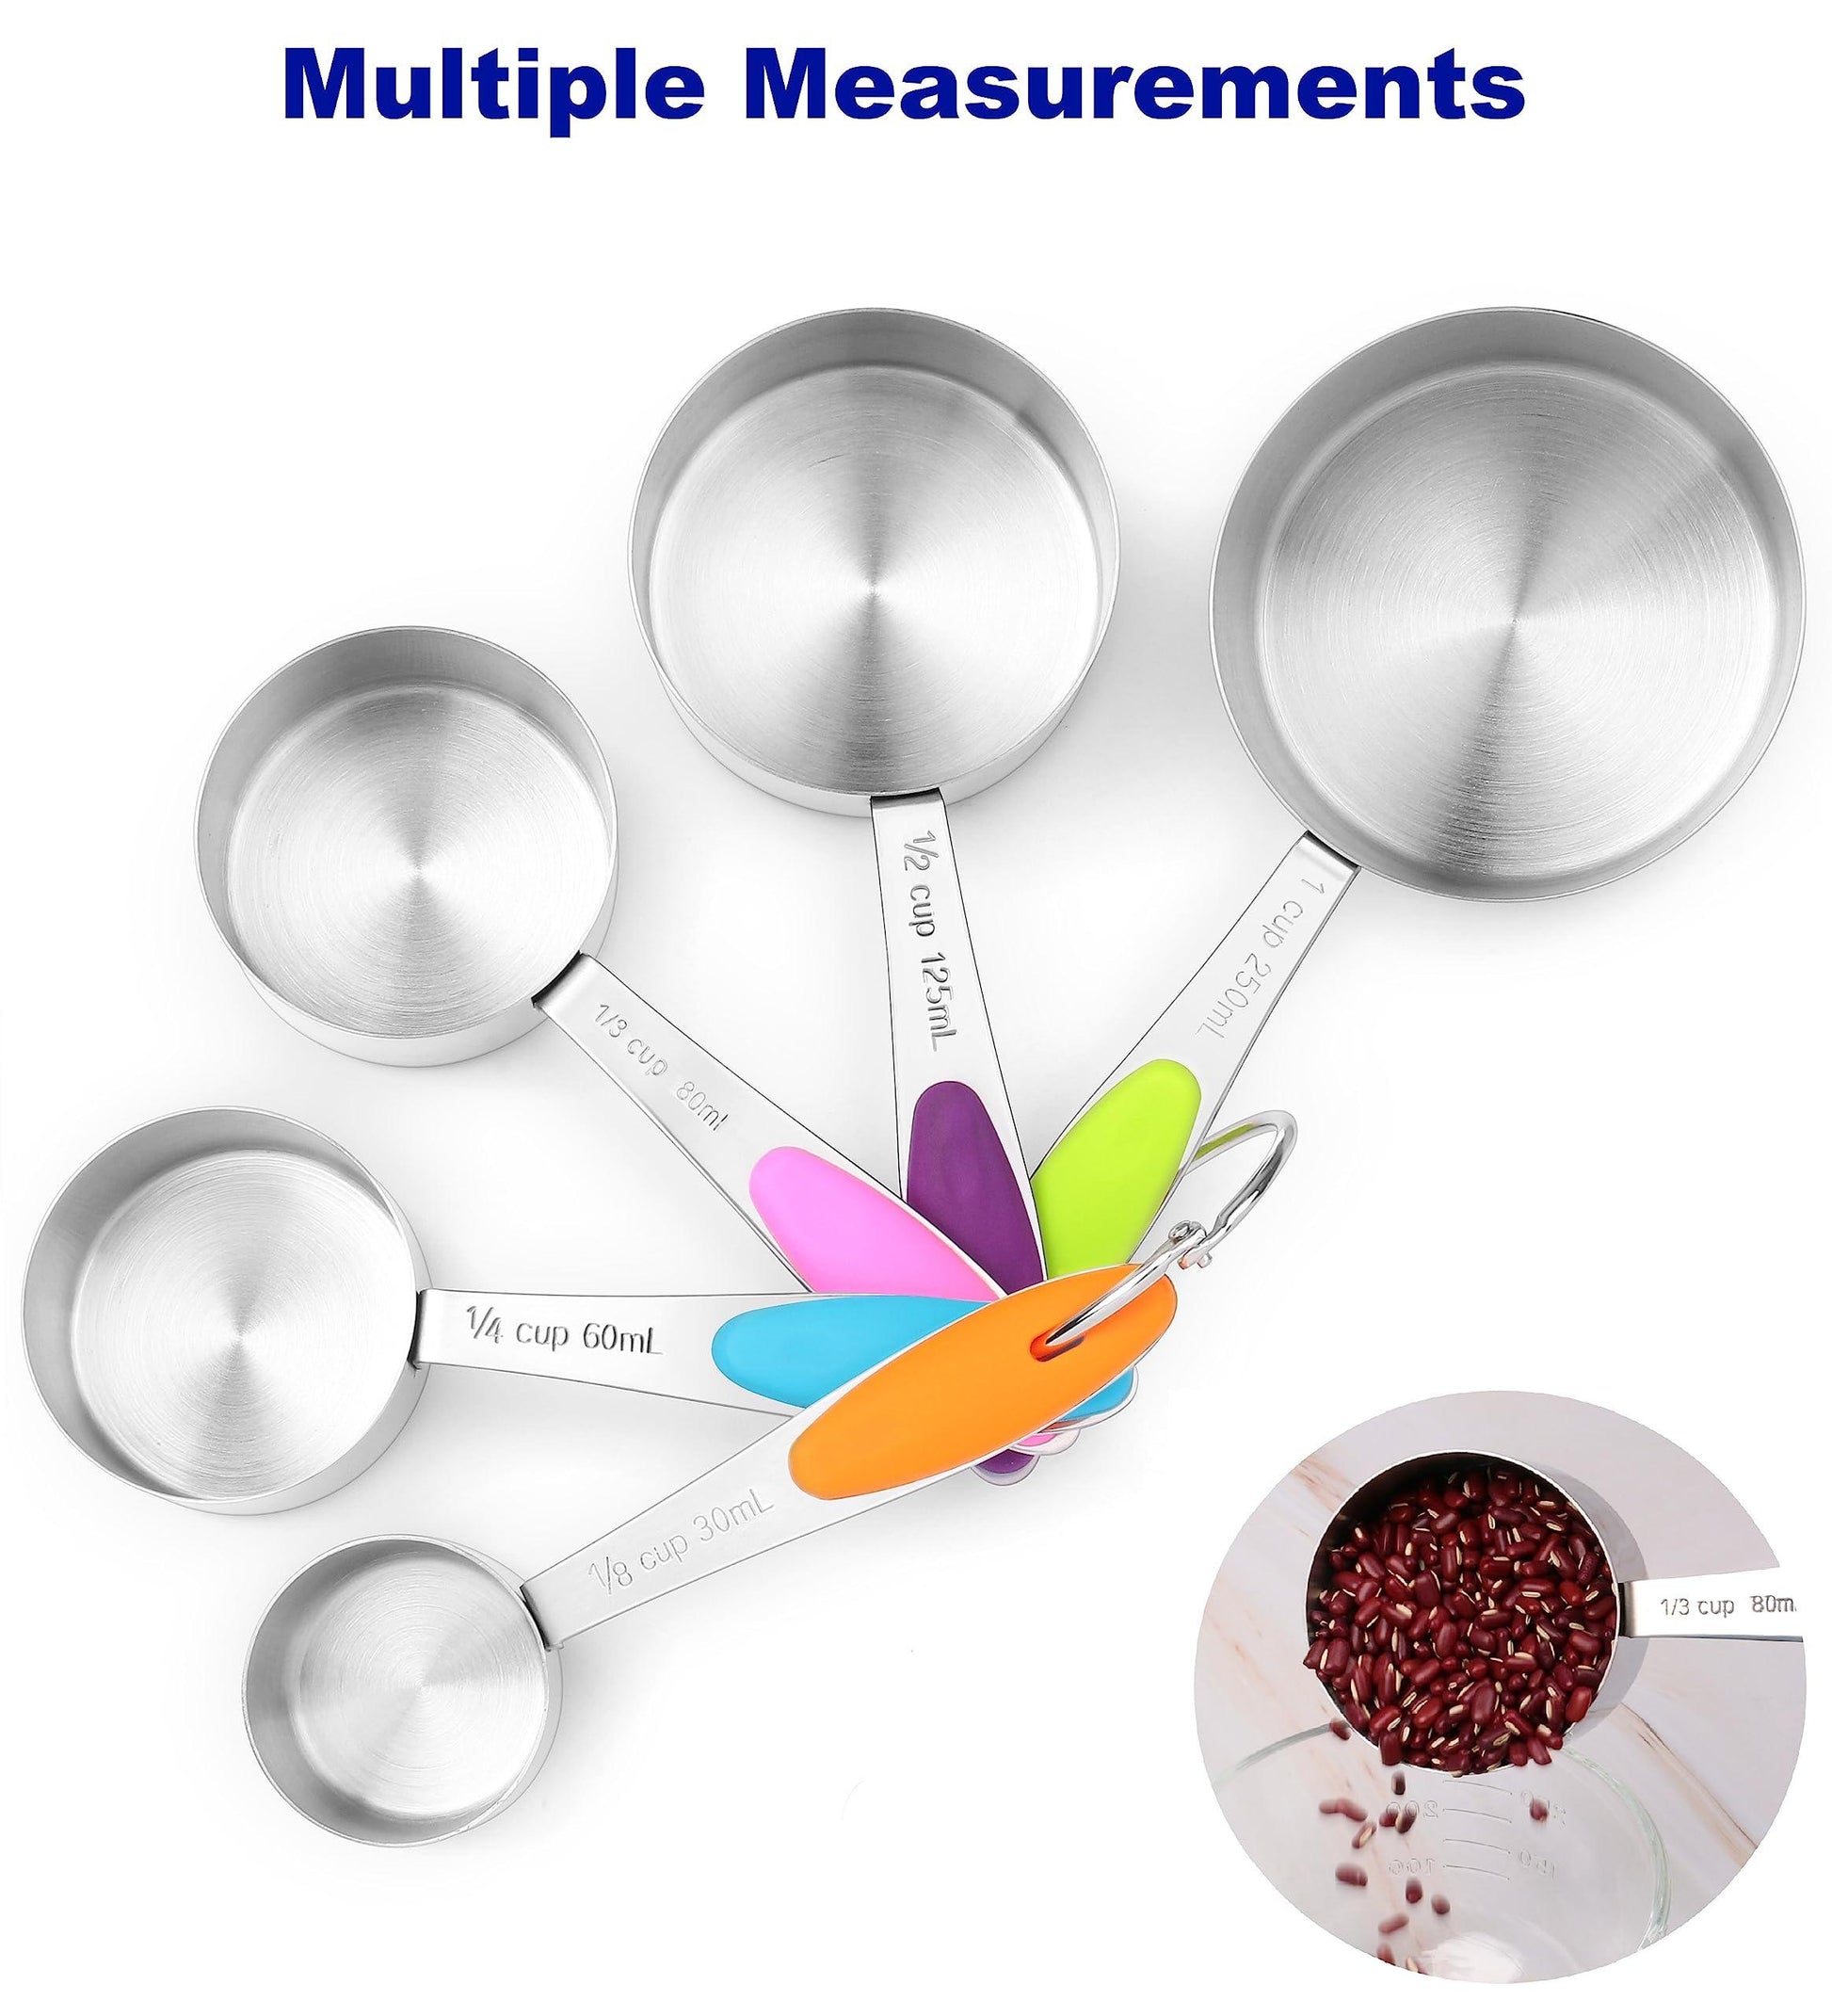 Measuring Cups Set Stainless Steel-Measuring Spoon Liquid Stackable Metric Measuring Scoop for Baking or Cooking,Kitchen Cake Decorating Supplies Measuring Cup Organizer - CookCave